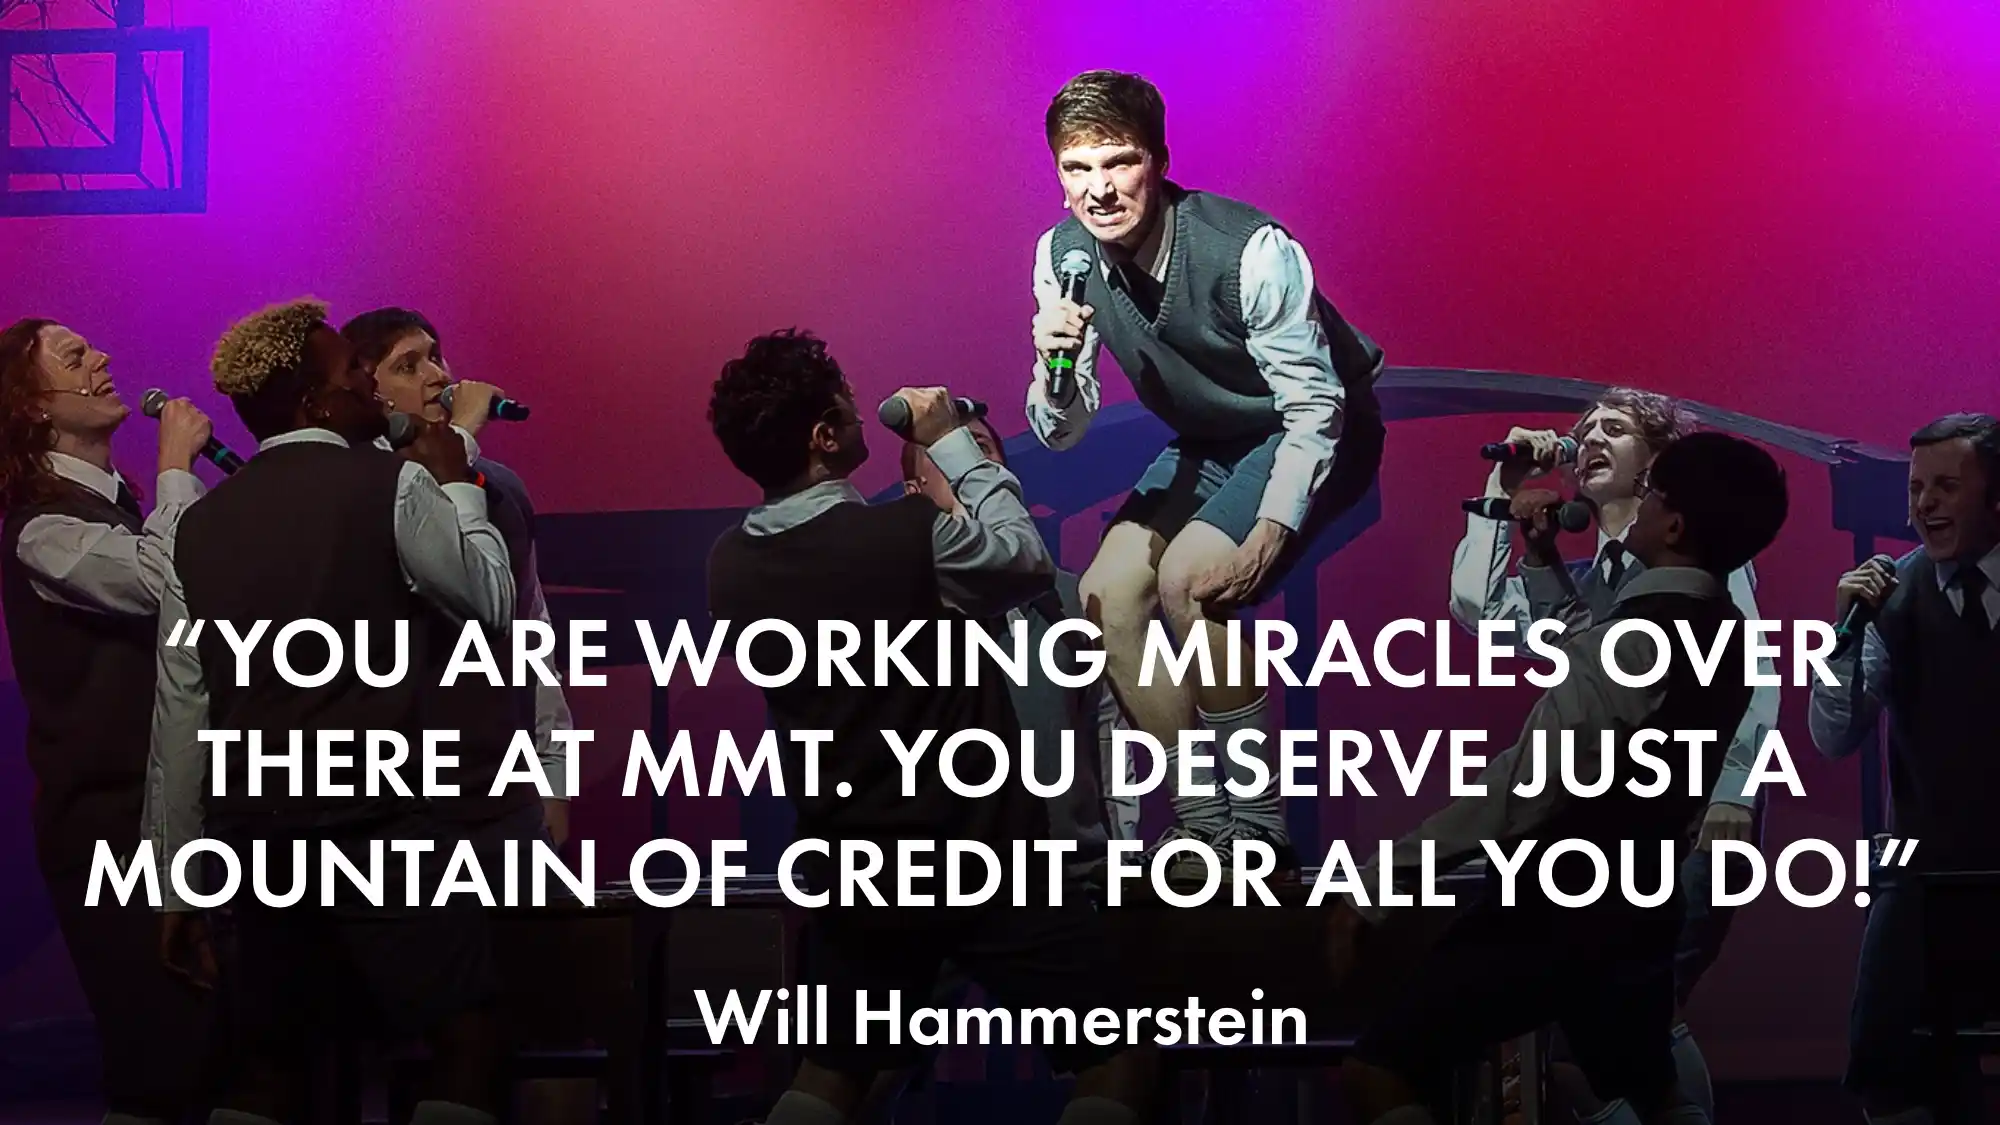 "You are working miracles over there at MMT. You deserve just a mountain of credit for all you do!" - Will Hammerstein